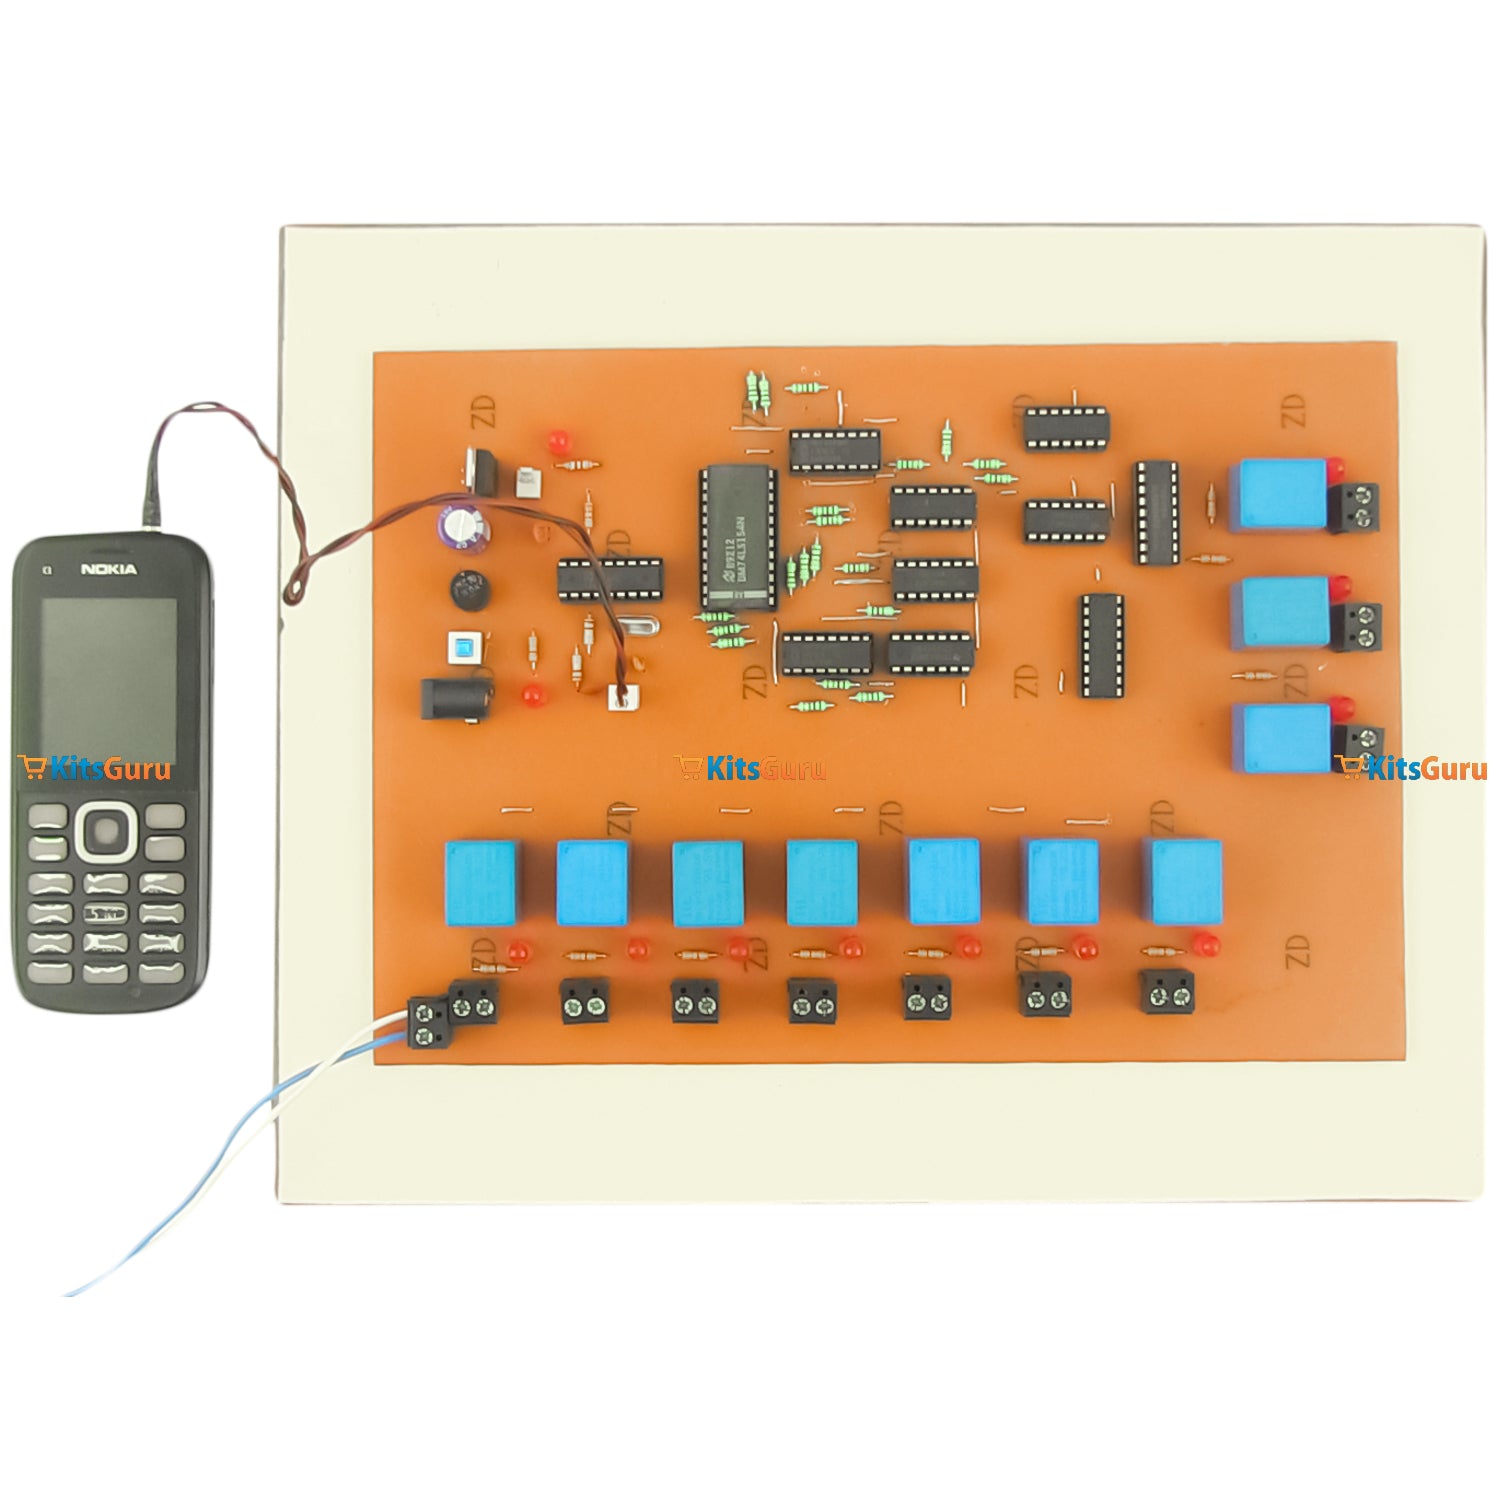 Electrical Appliances Controlling System Using Cell Phone